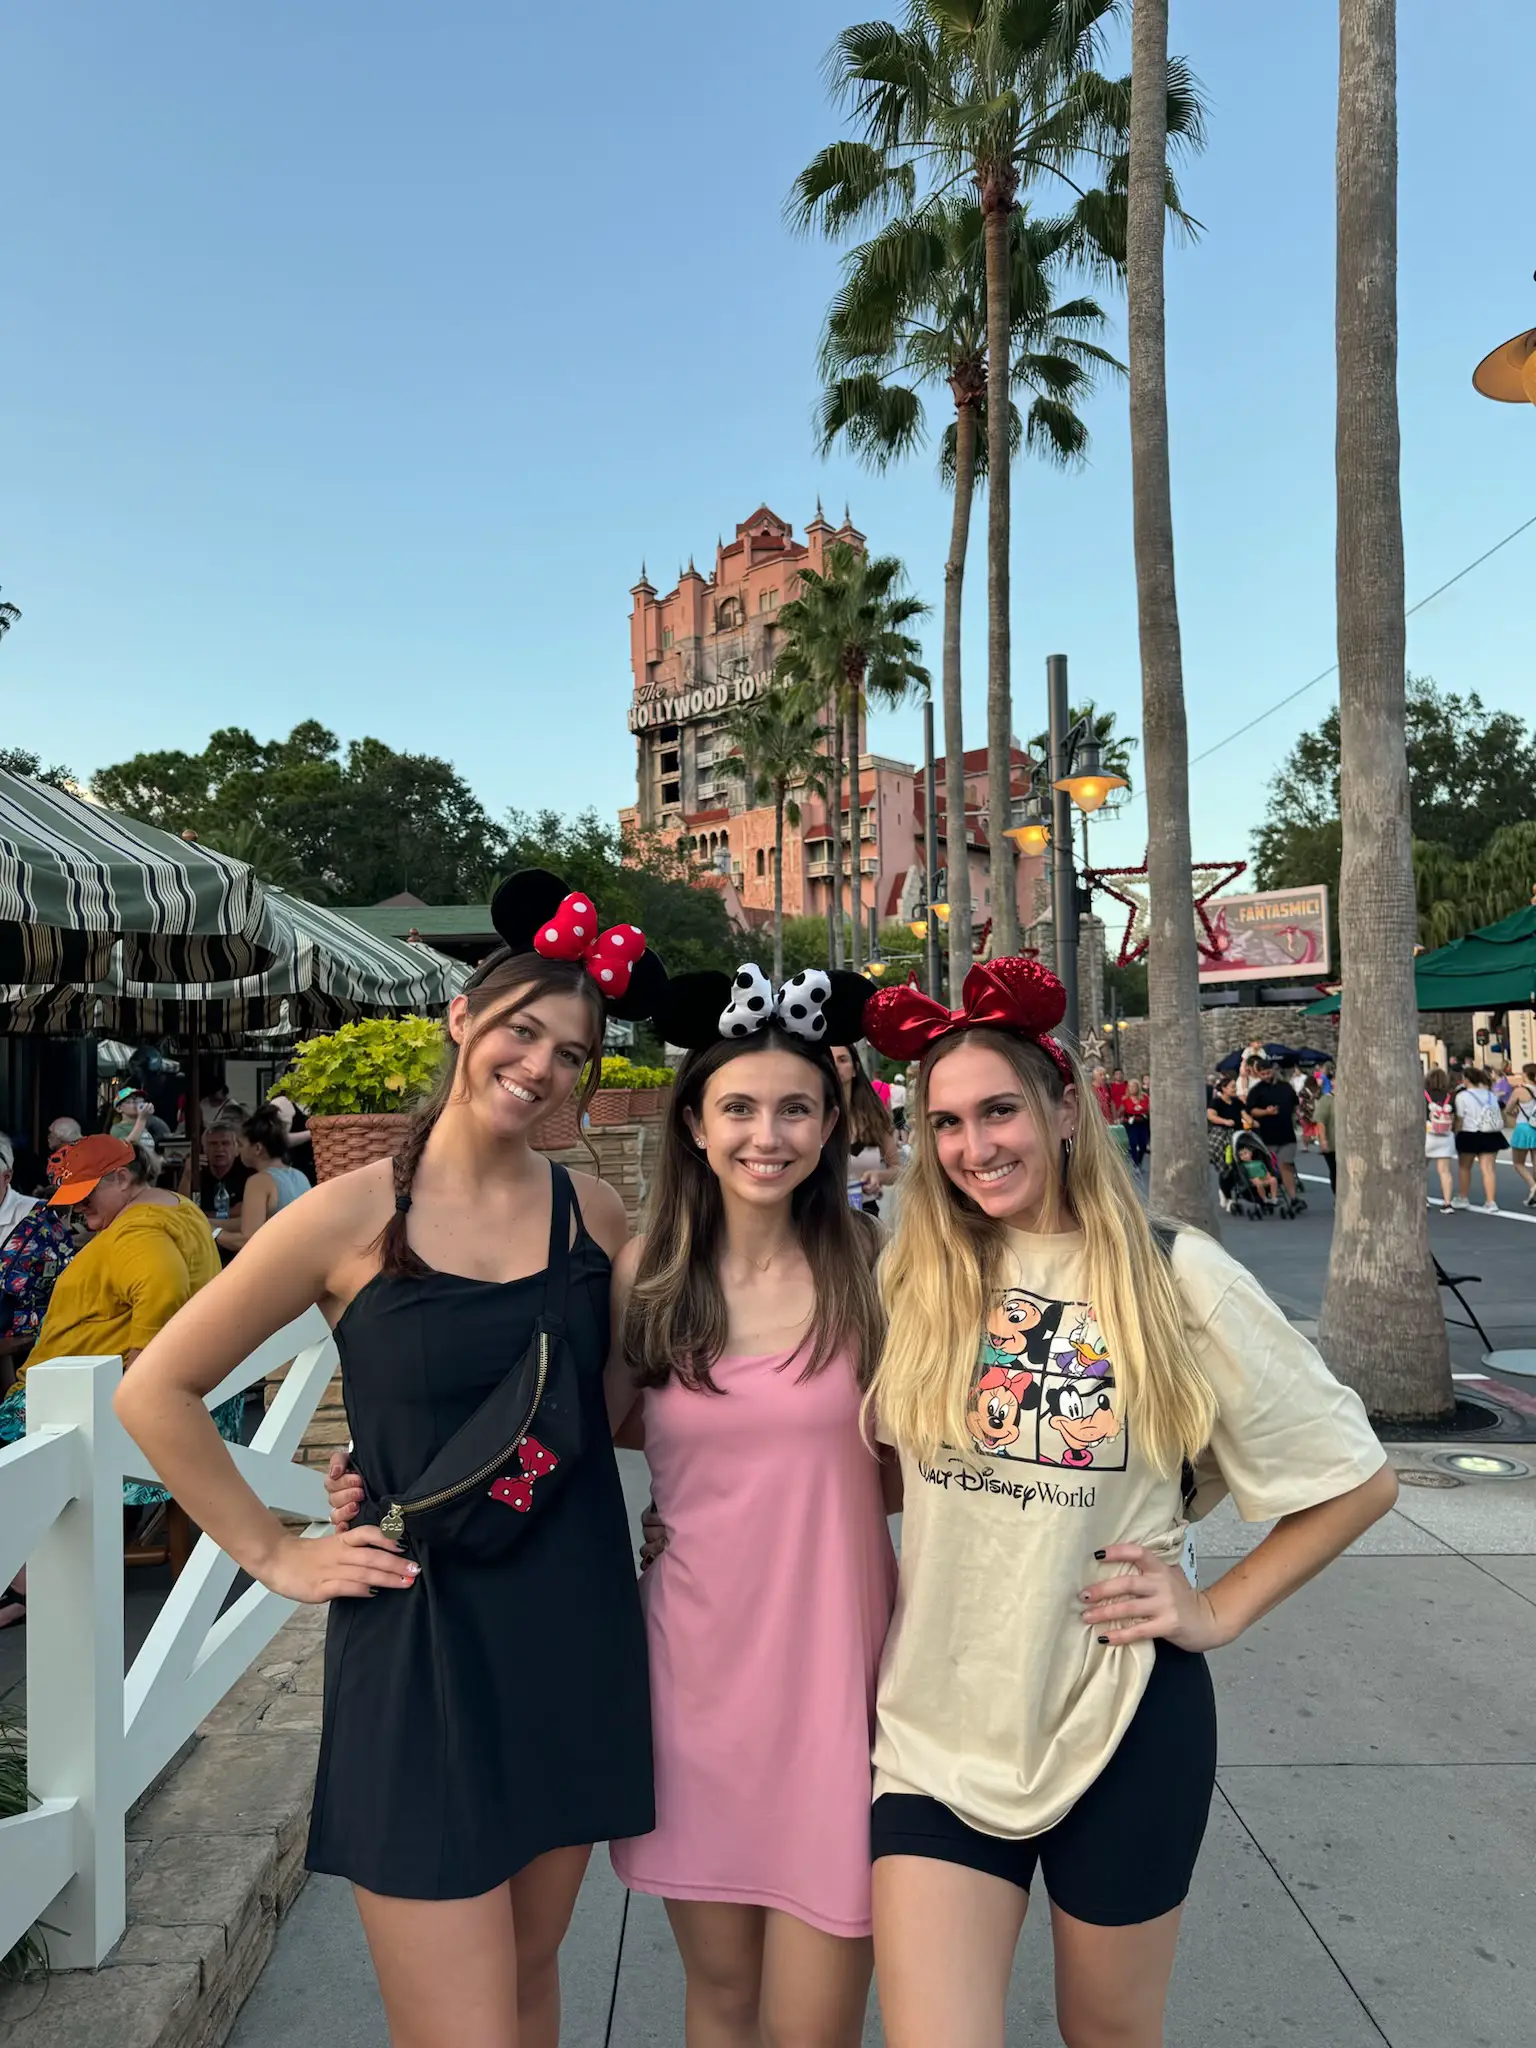  Three women wearing Minnie Mouse ears on their heads.